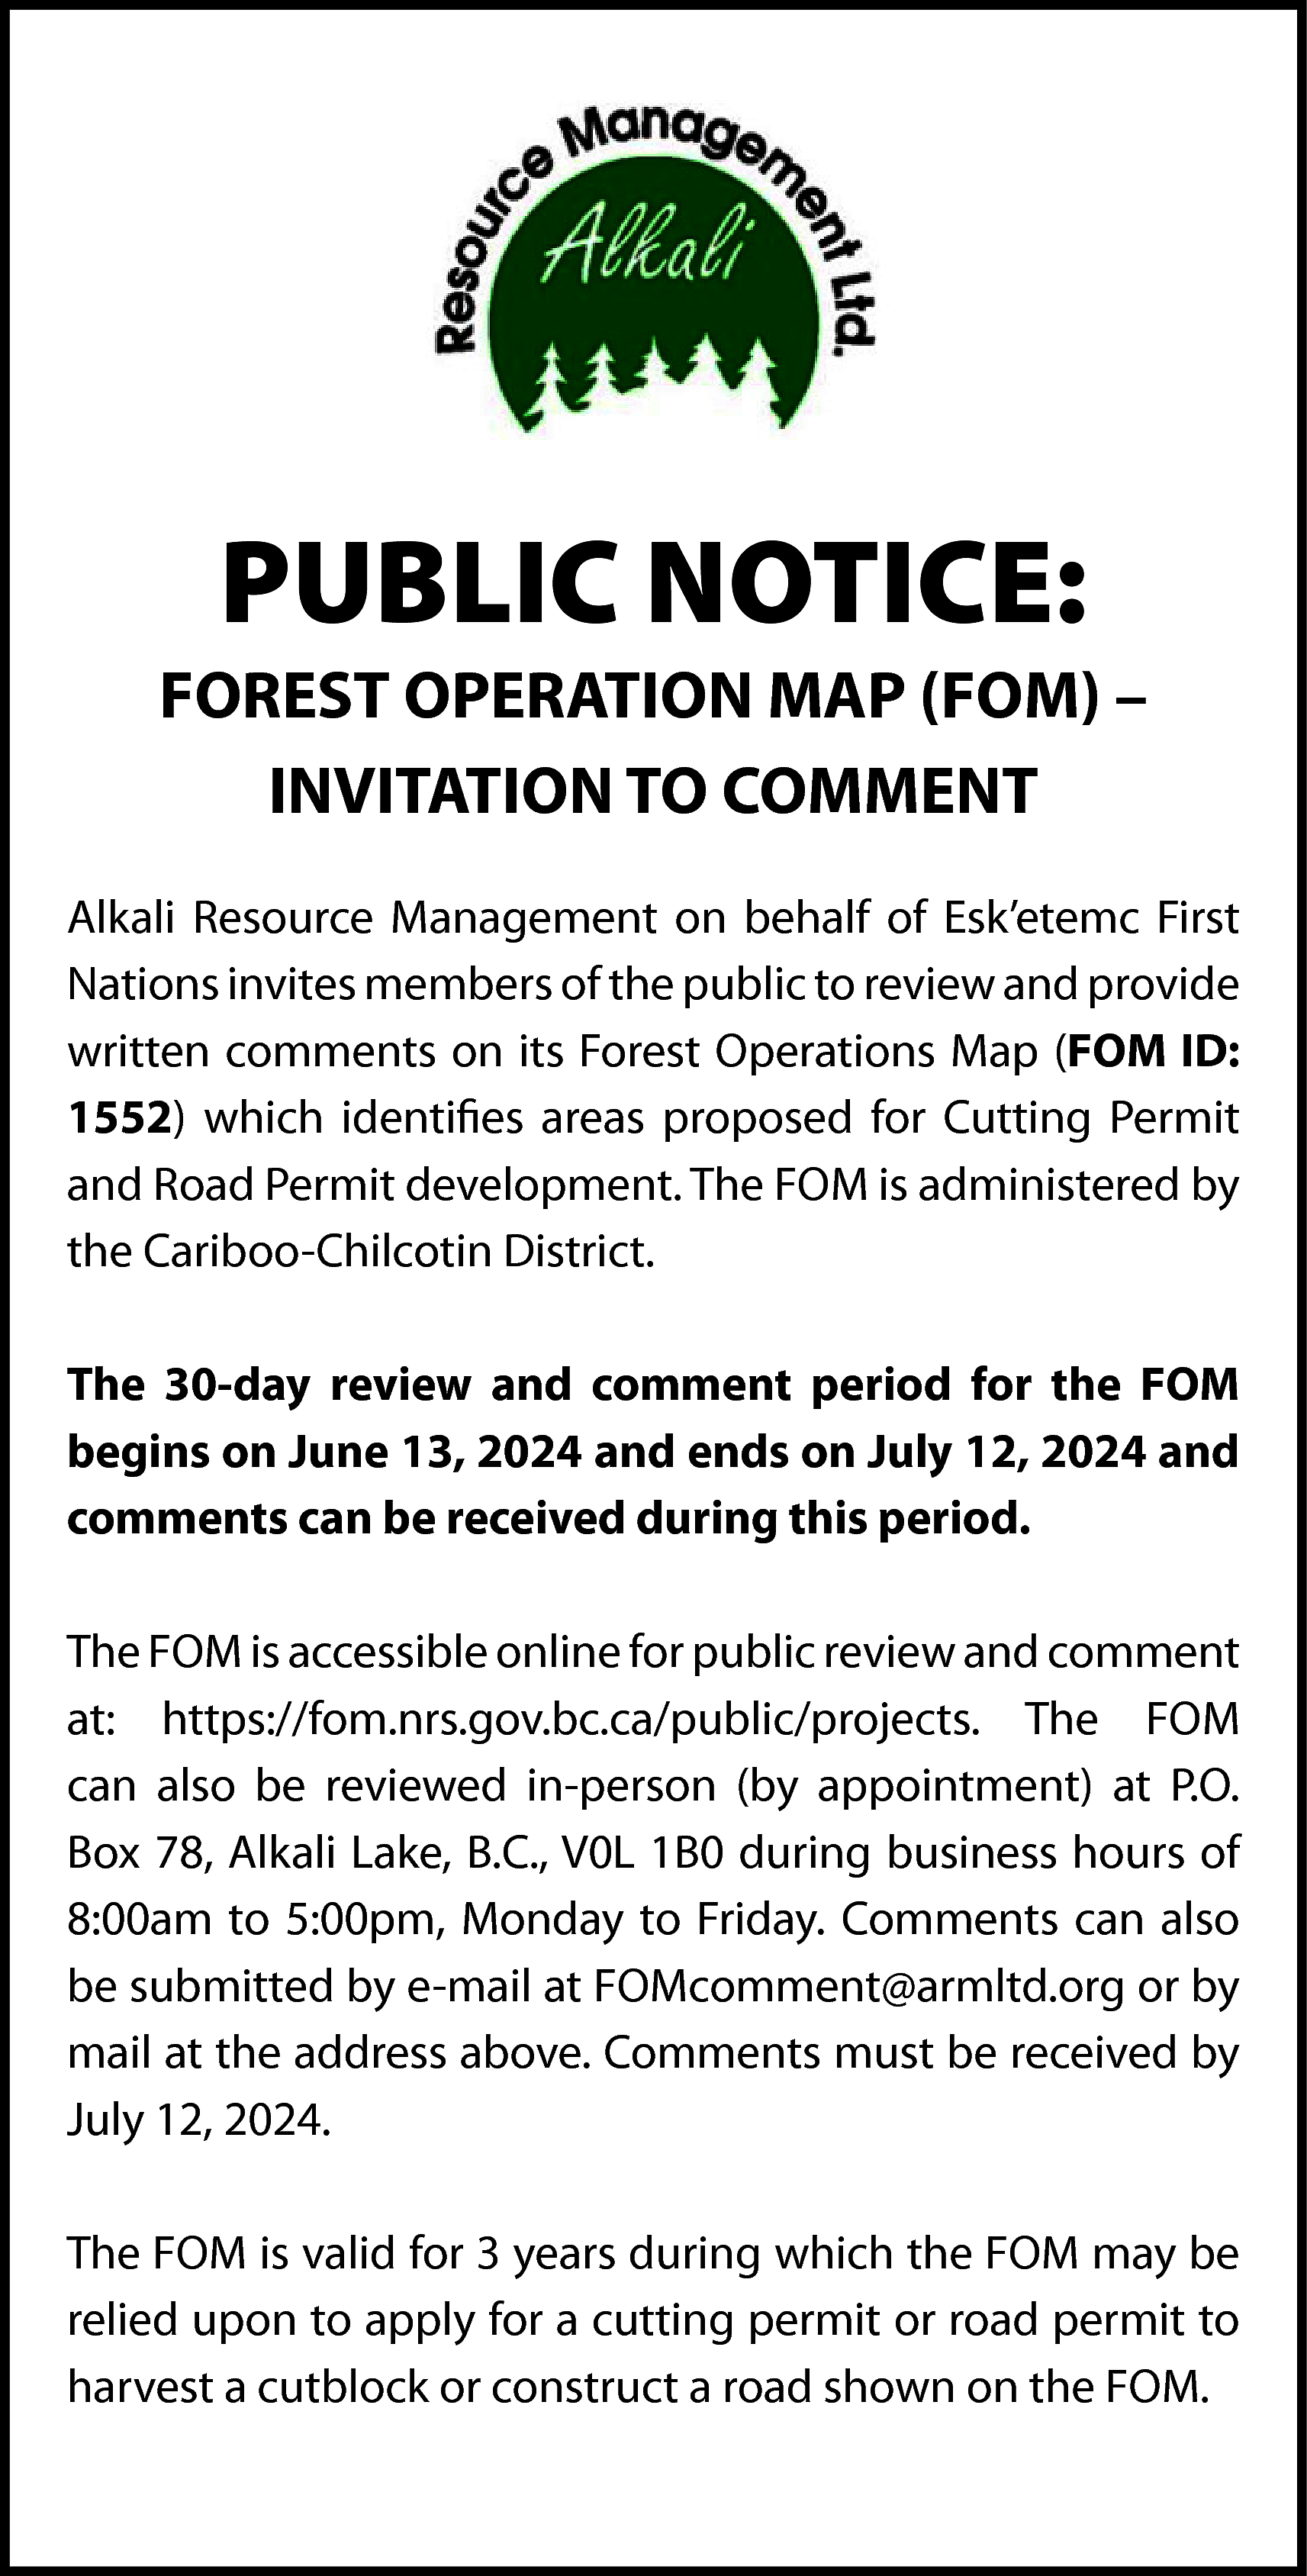 PUBLIC NOTICE: <br> <br>FOREST OPERATION  PUBLIC NOTICE:    FOREST OPERATION MAP (FOM) –  INVITATION TO COMMENT  Alkali Resource Management on behalf of Esk’etemc First  Nations invites members of the public to review and provide  written comments on its Forest Operations Map (FOM ID:  1552) which identifies areas proposed for Cutting Permit  and Road Permit development. The FOM is administered by  the Cariboo-Chilcotin District.  The 30-day review and comment period for the FOM  begins on June 13, 2024 and ends on July 12, 2024 and  comments can be received during this period.  The FOM is accessible online for public review and comment  at: https://fom.nrs.gov.bc.ca/public/projects. The FOM  can also be reviewed in-person (by appointment) at P.O.  Box 78, Alkali Lake, B.C., V0L 1B0 during business hours of  8:00am to 5:00pm, Monday to Friday. Comments can also  be submitted by e-mail at FOMcomment@armltd.org or by  mail at the address above. Comments must be received by  July 12, 2024.  The FOM is valid for 3 years during which the FOM may be  relied upon to apply for a cutting permit or road permit to  harvest a cutblock or construct a road shown on the FOM.    